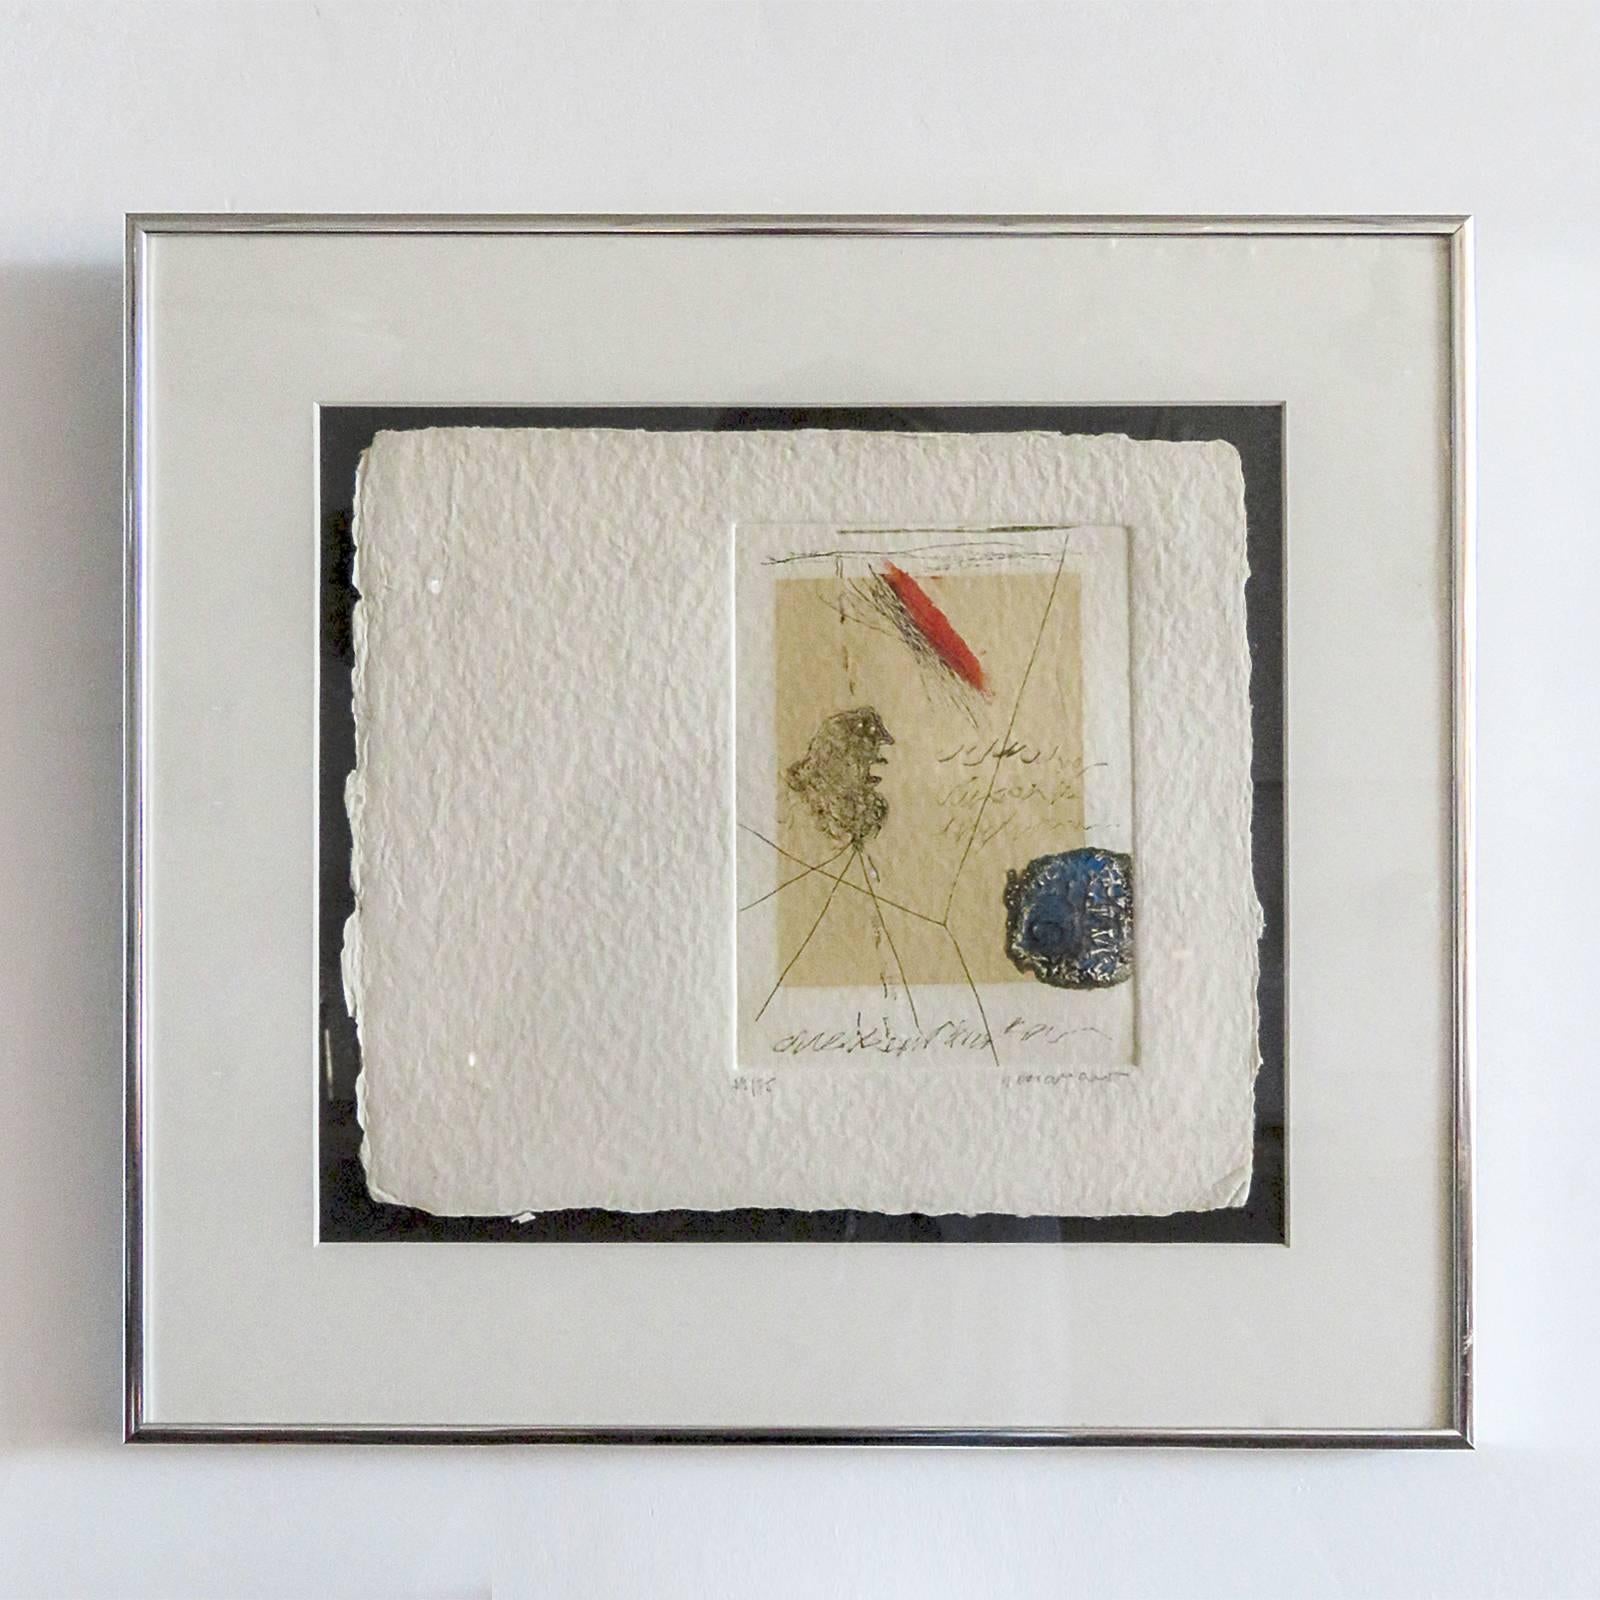 Wonderful original signed and framed carborundum etching 'Composition' by French artist James Coignard (1925-2008), provenance: Galleri S:T Lars, Sweden, exhibited March 22nd 1986, pencil signed and numbered by Coignard: 59/75, image size: 10